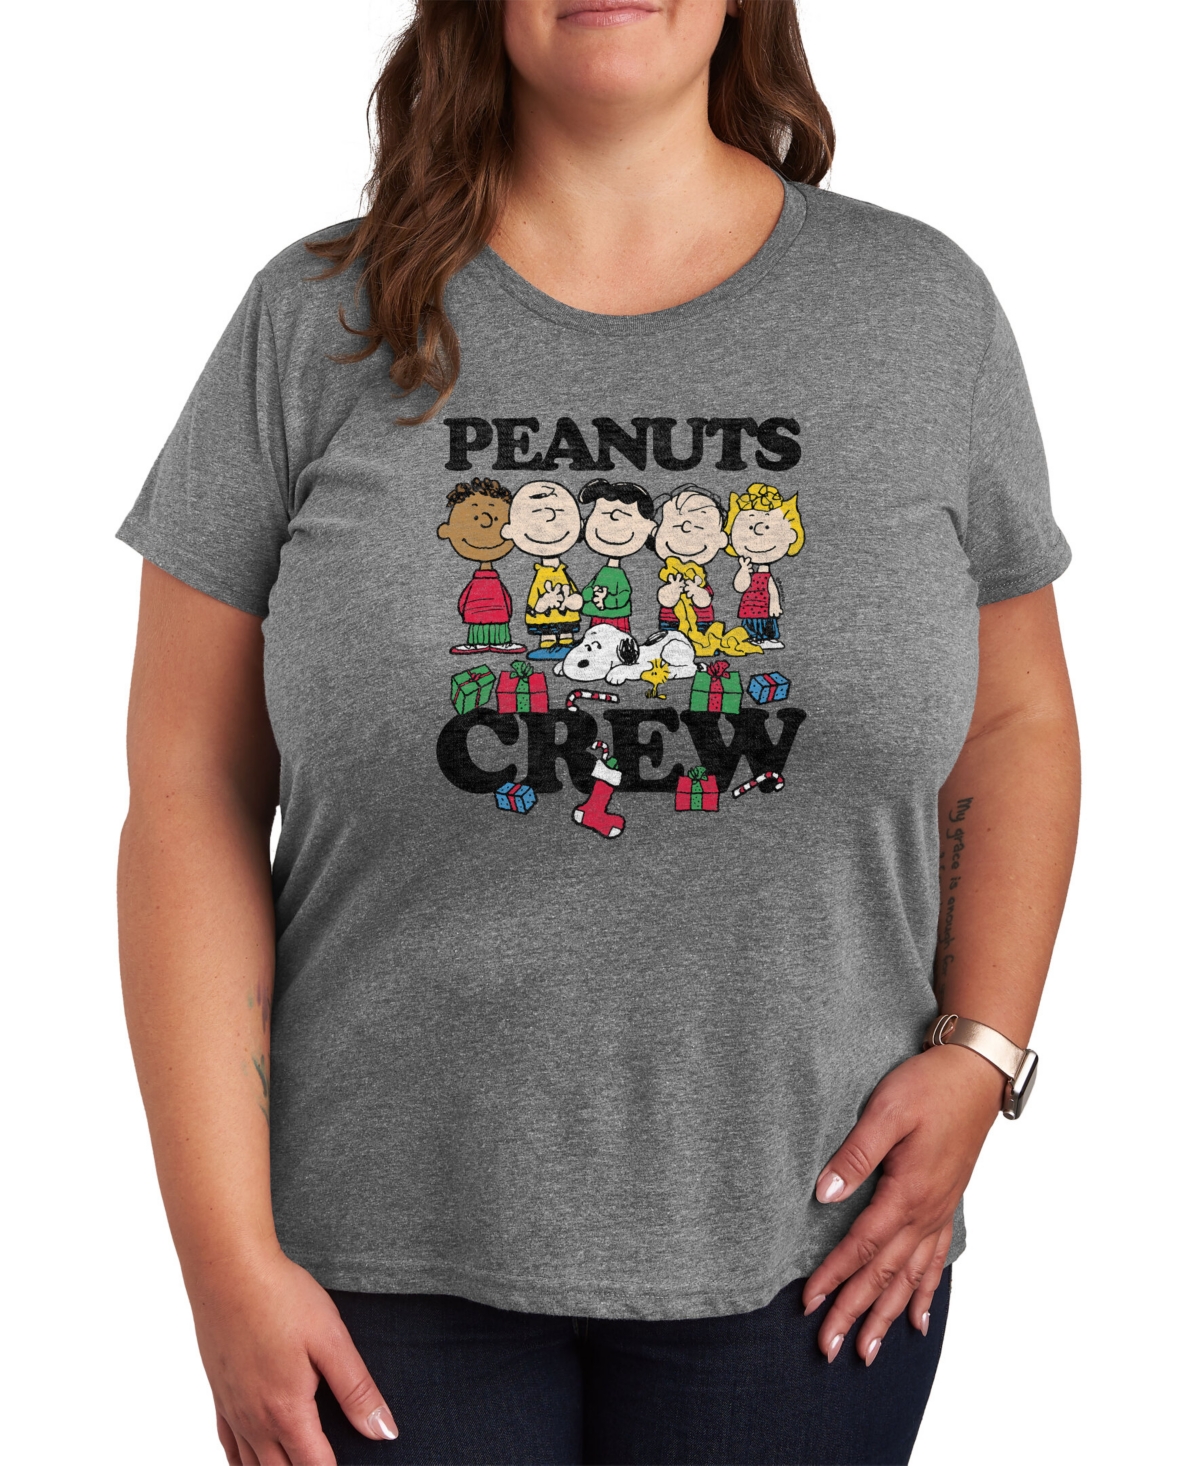 Air Waves Trendy Plus Size Peanuts Crew Graphic T-shirt - Gray